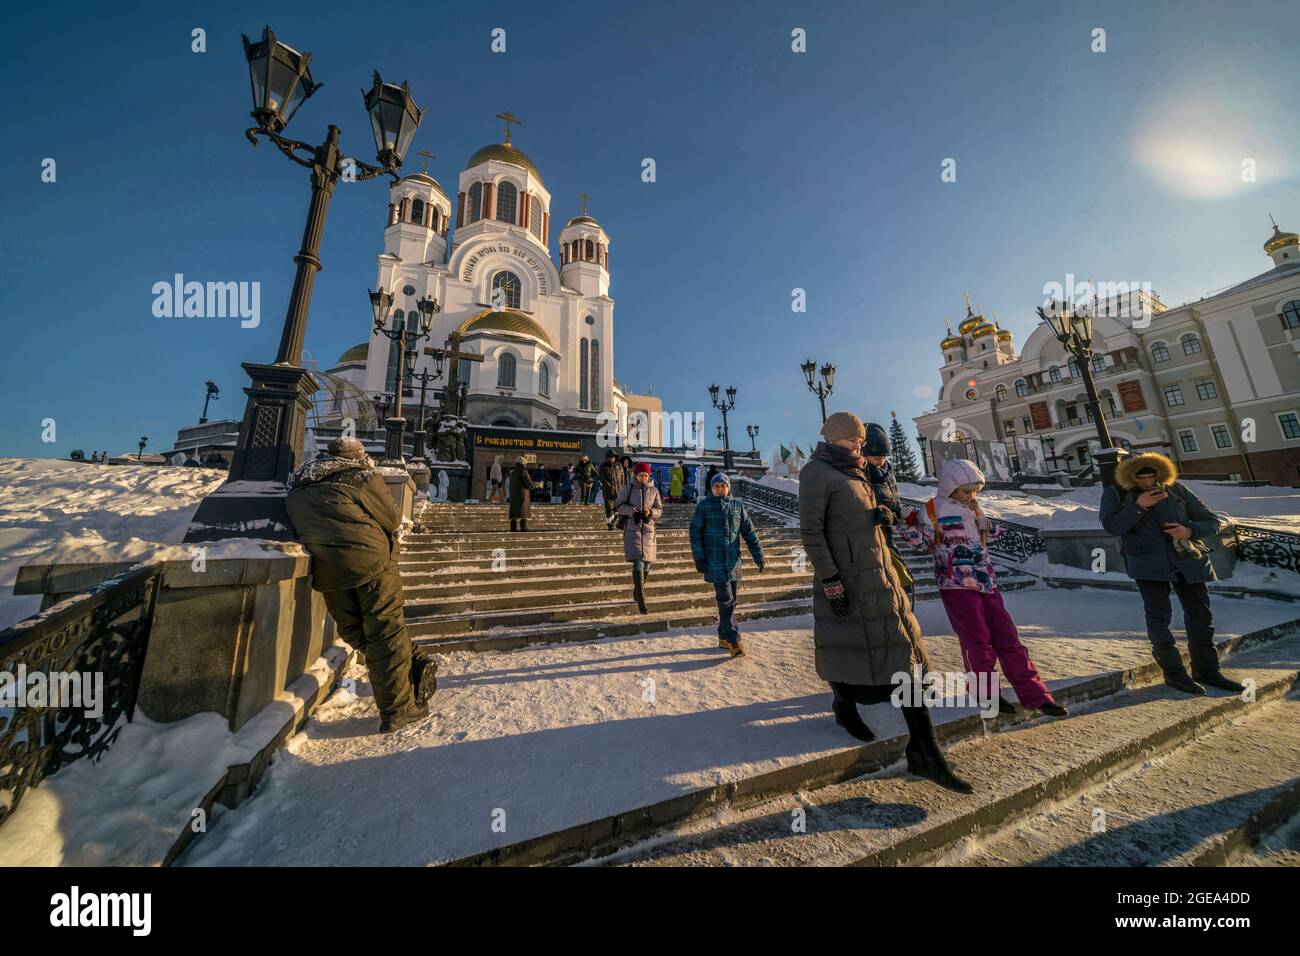 Congregants descend the stairs at the Church of All Saints at Ekaterinburg in Russia. Stock Photo